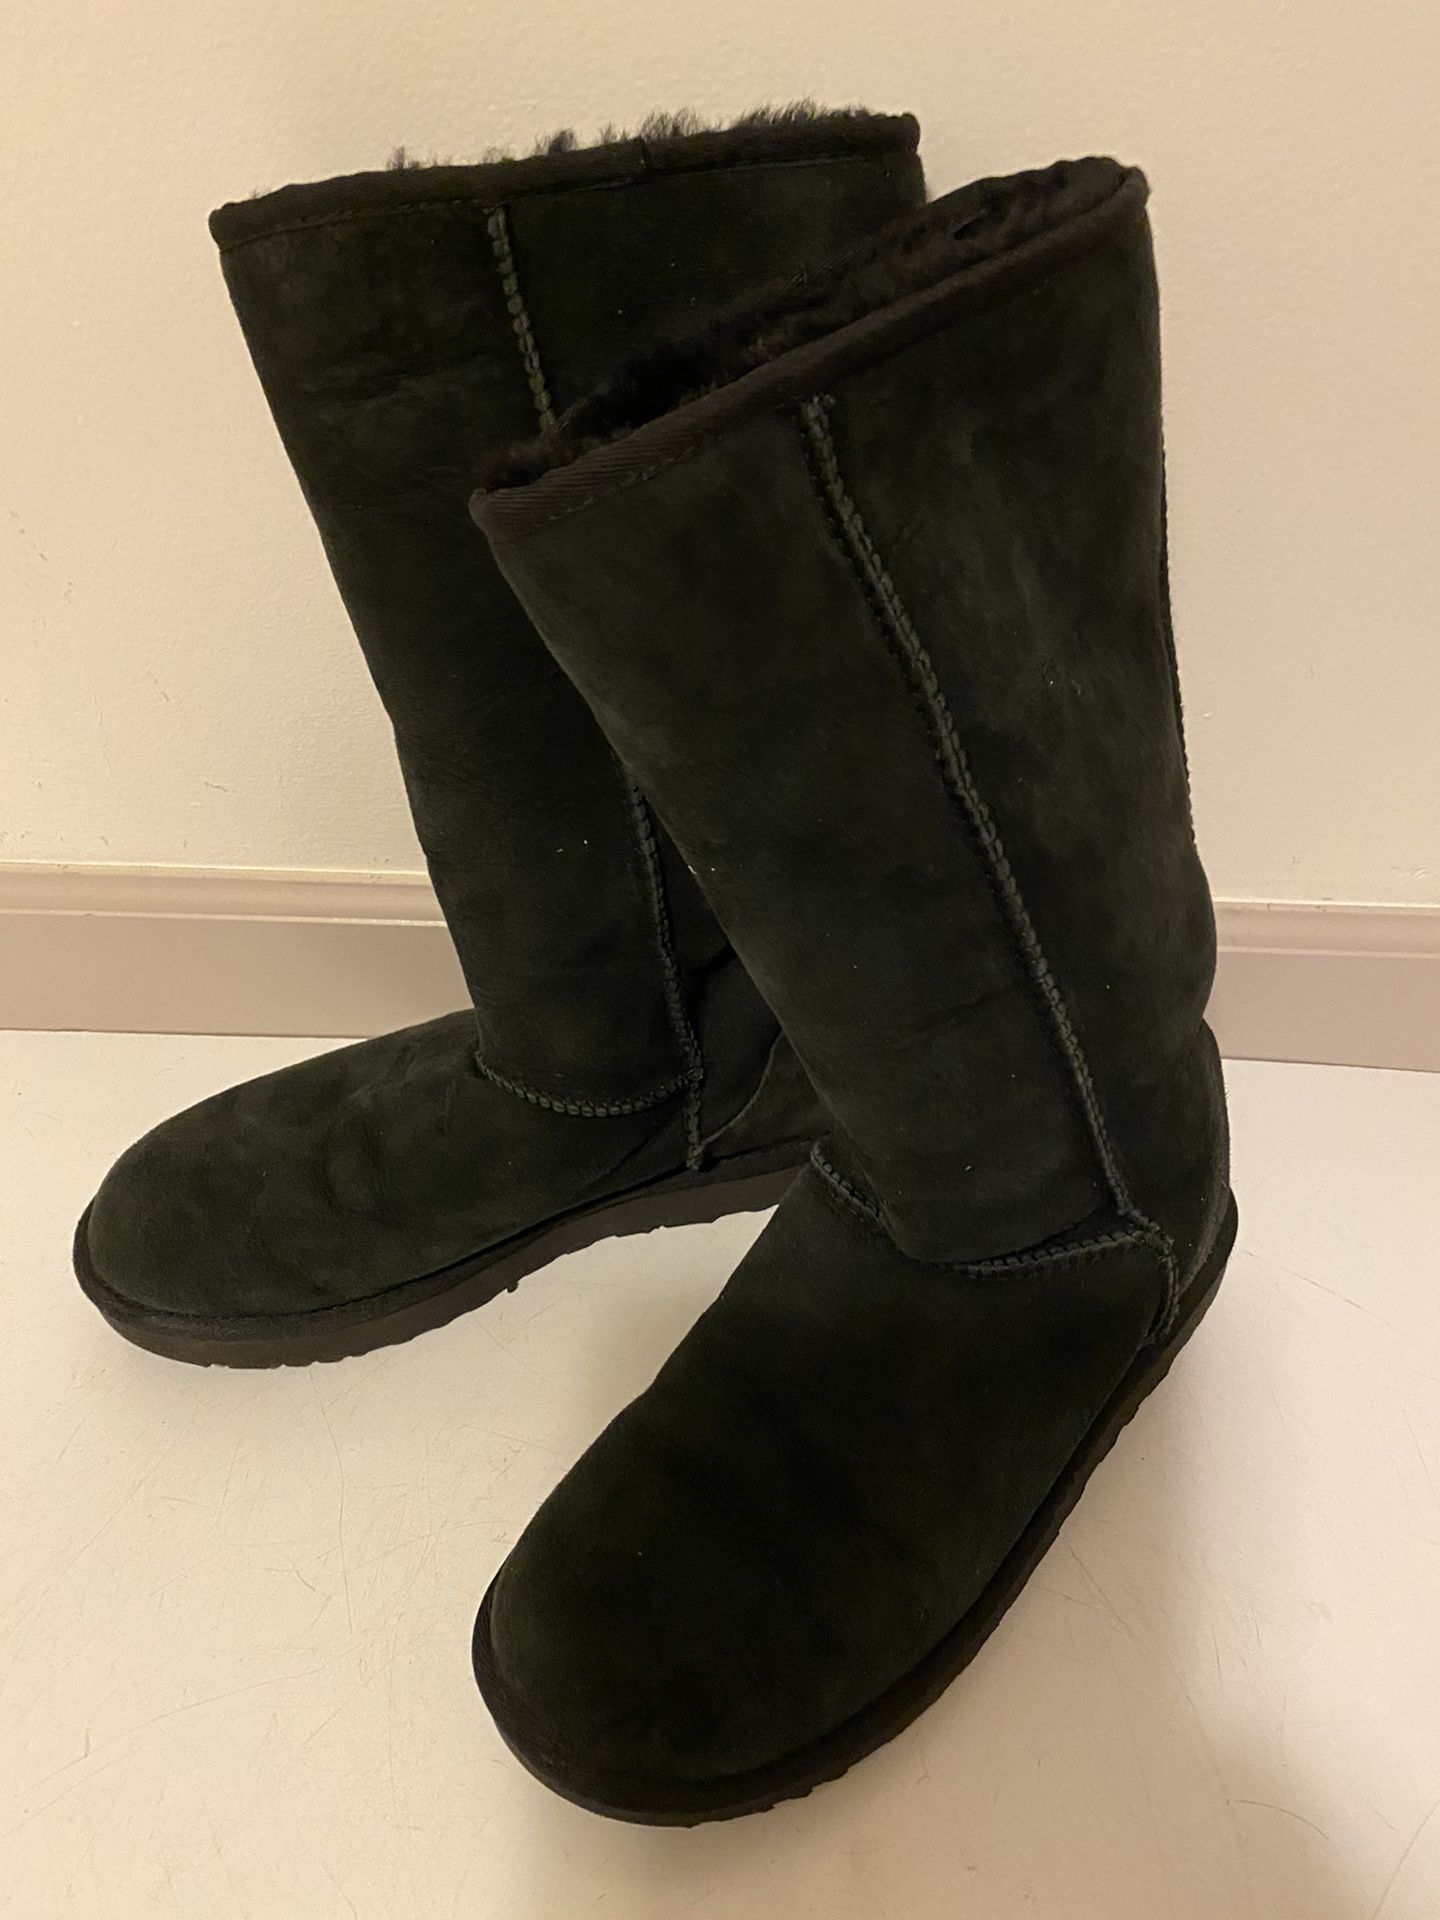 Ugg boots, size women’s 9 USA